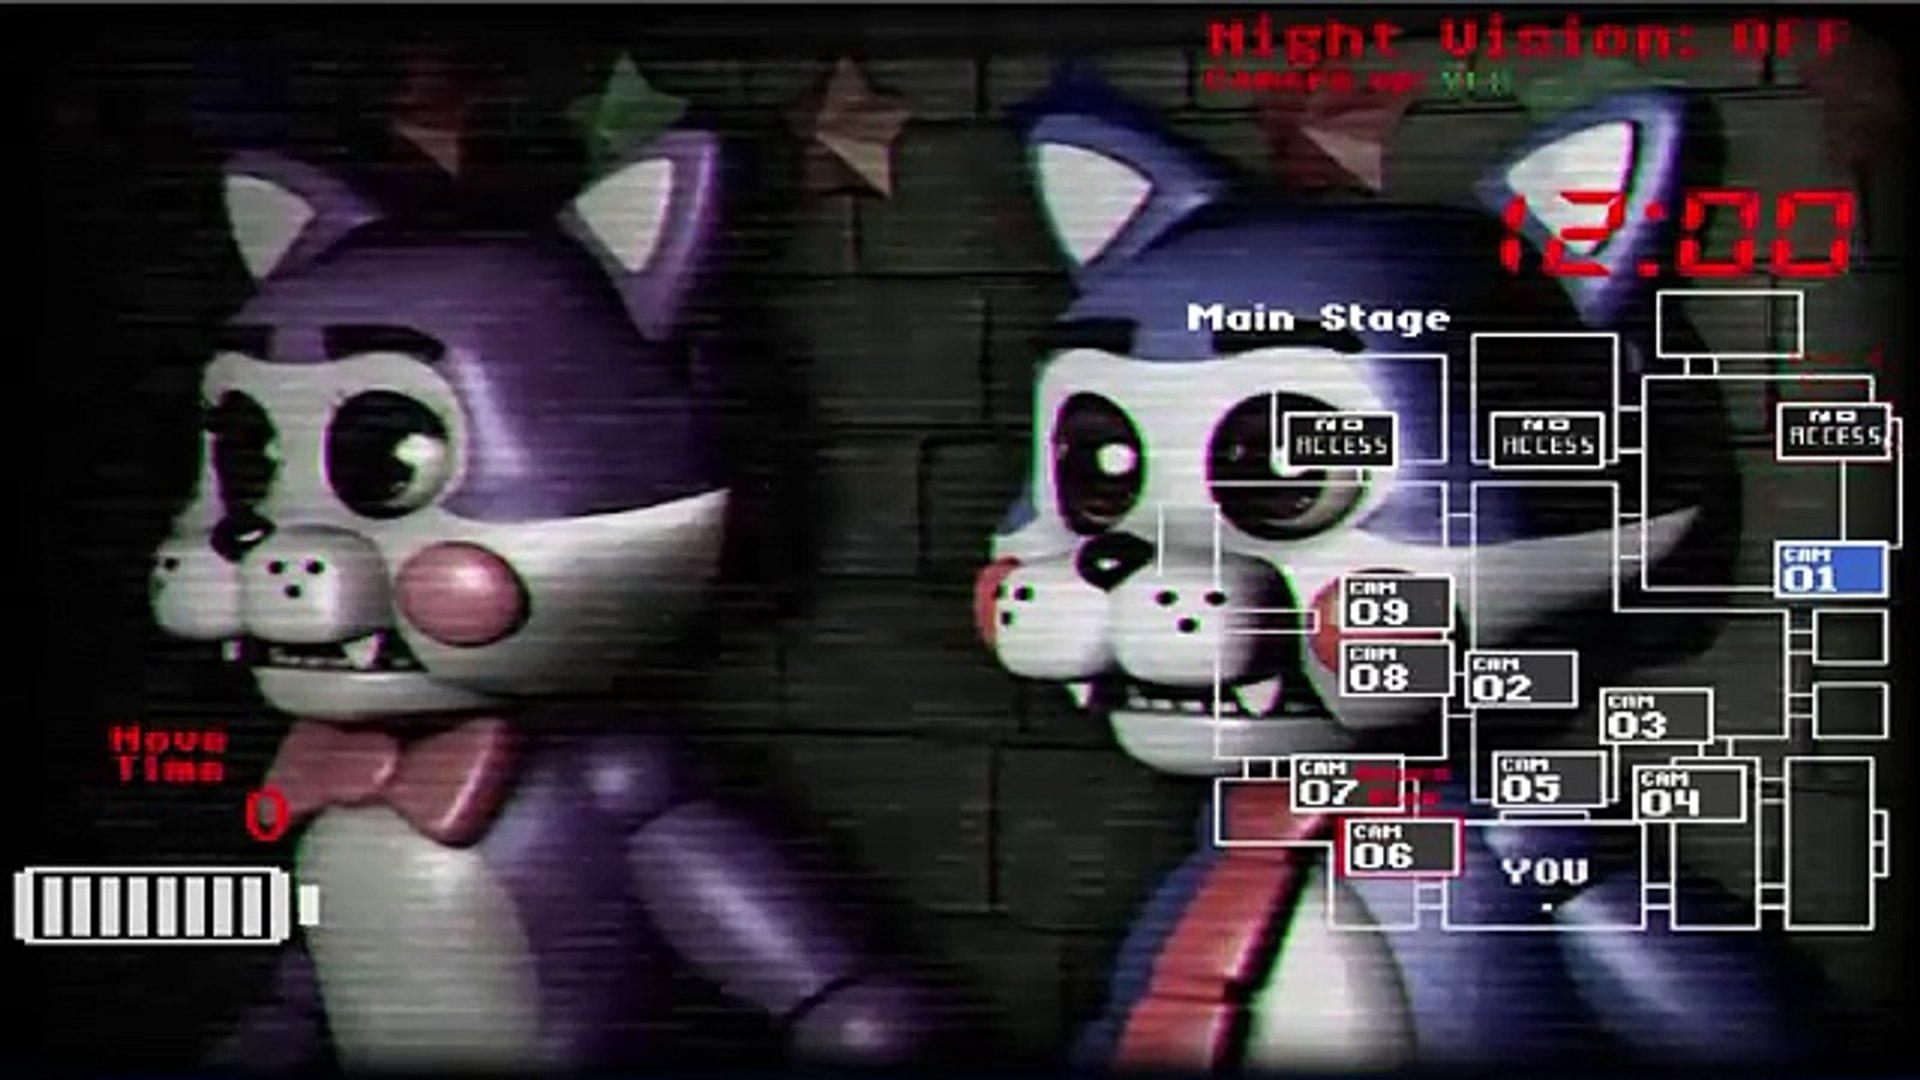 PC / Computer - Five Nights at Candy's - Backstage 2 (CAM 07